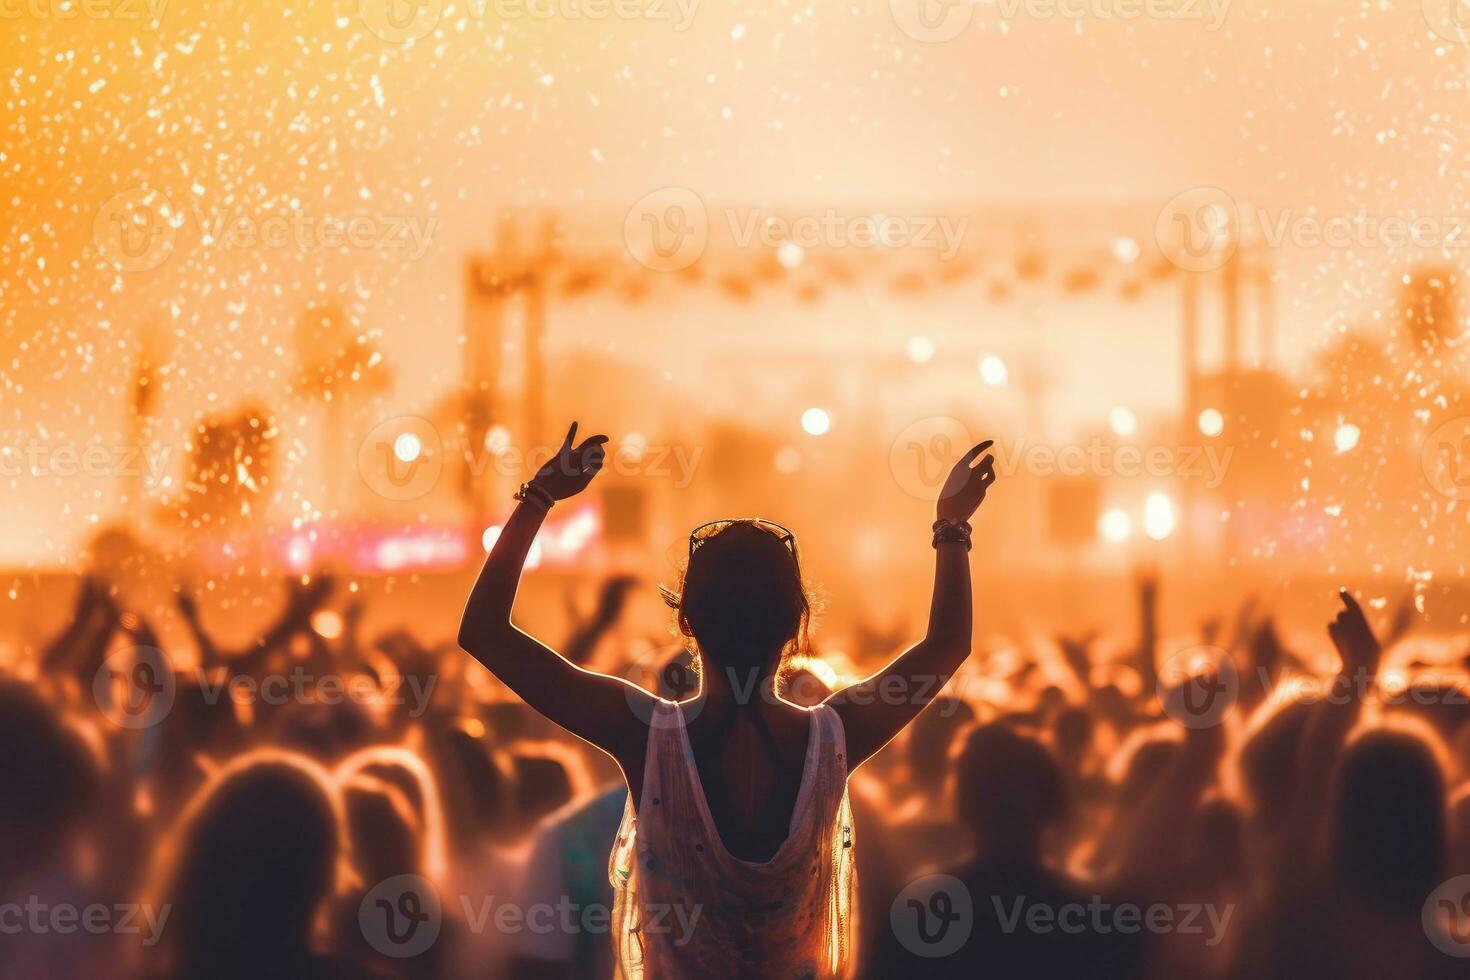 Crowd at concert - rear view of happy young woman with raised hands photo